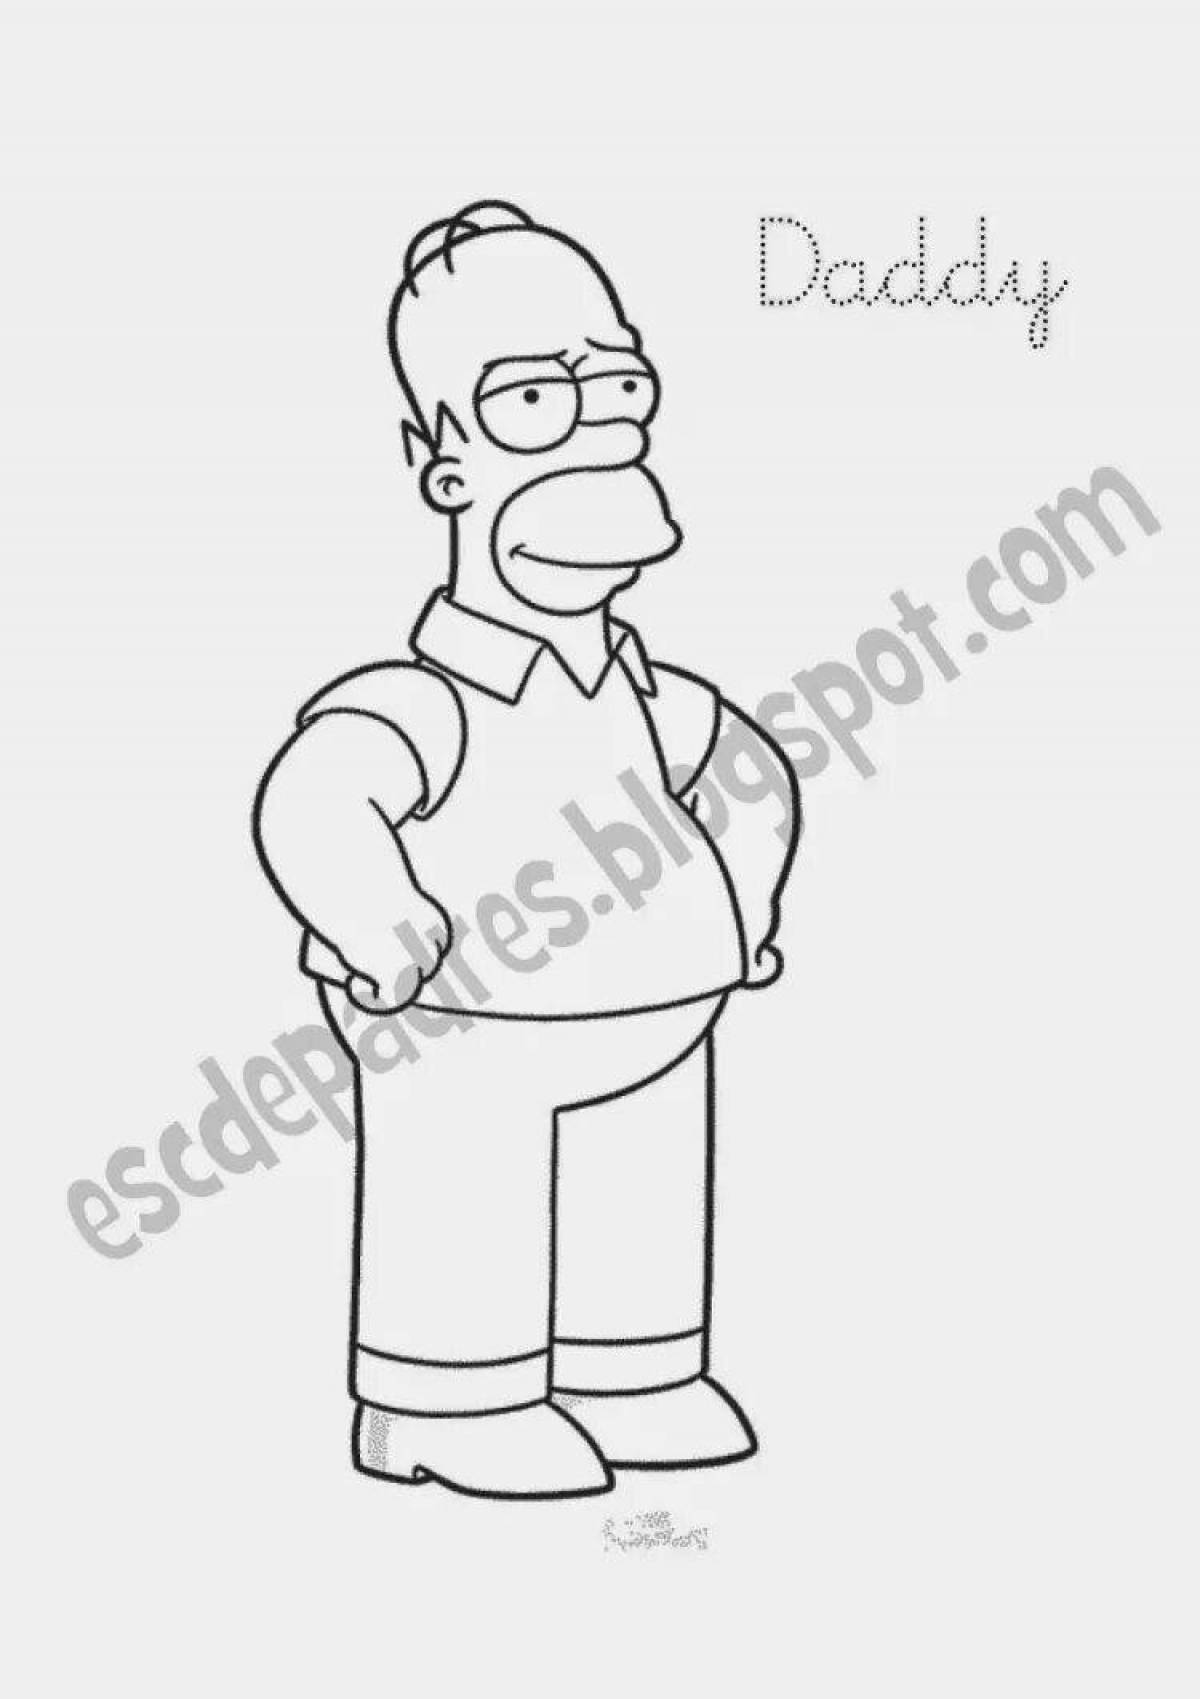 Colorful homer simpson coloring page